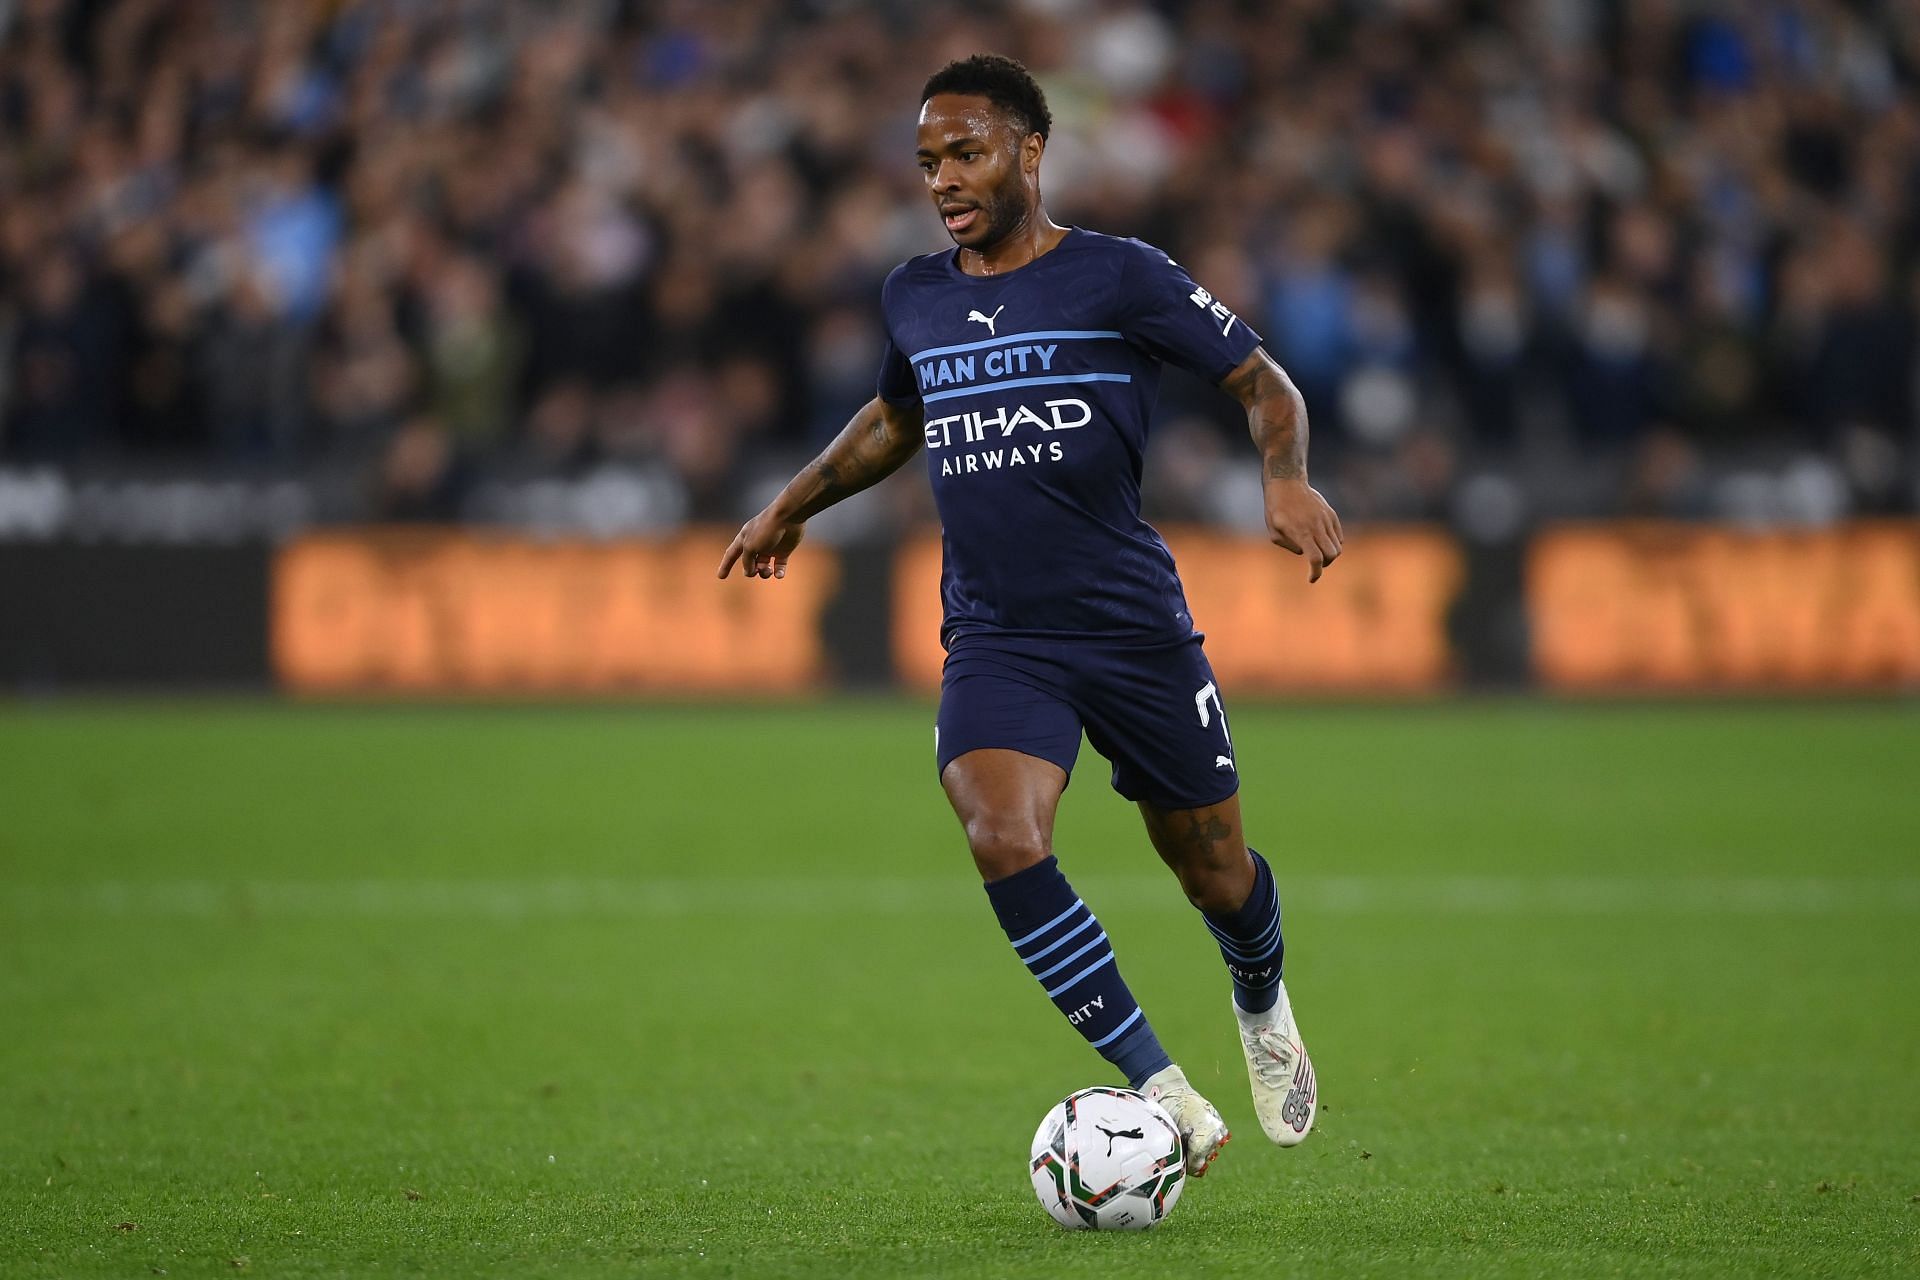 Arsenal have been dealt a blow in their quest to sign Raheem Sterling.